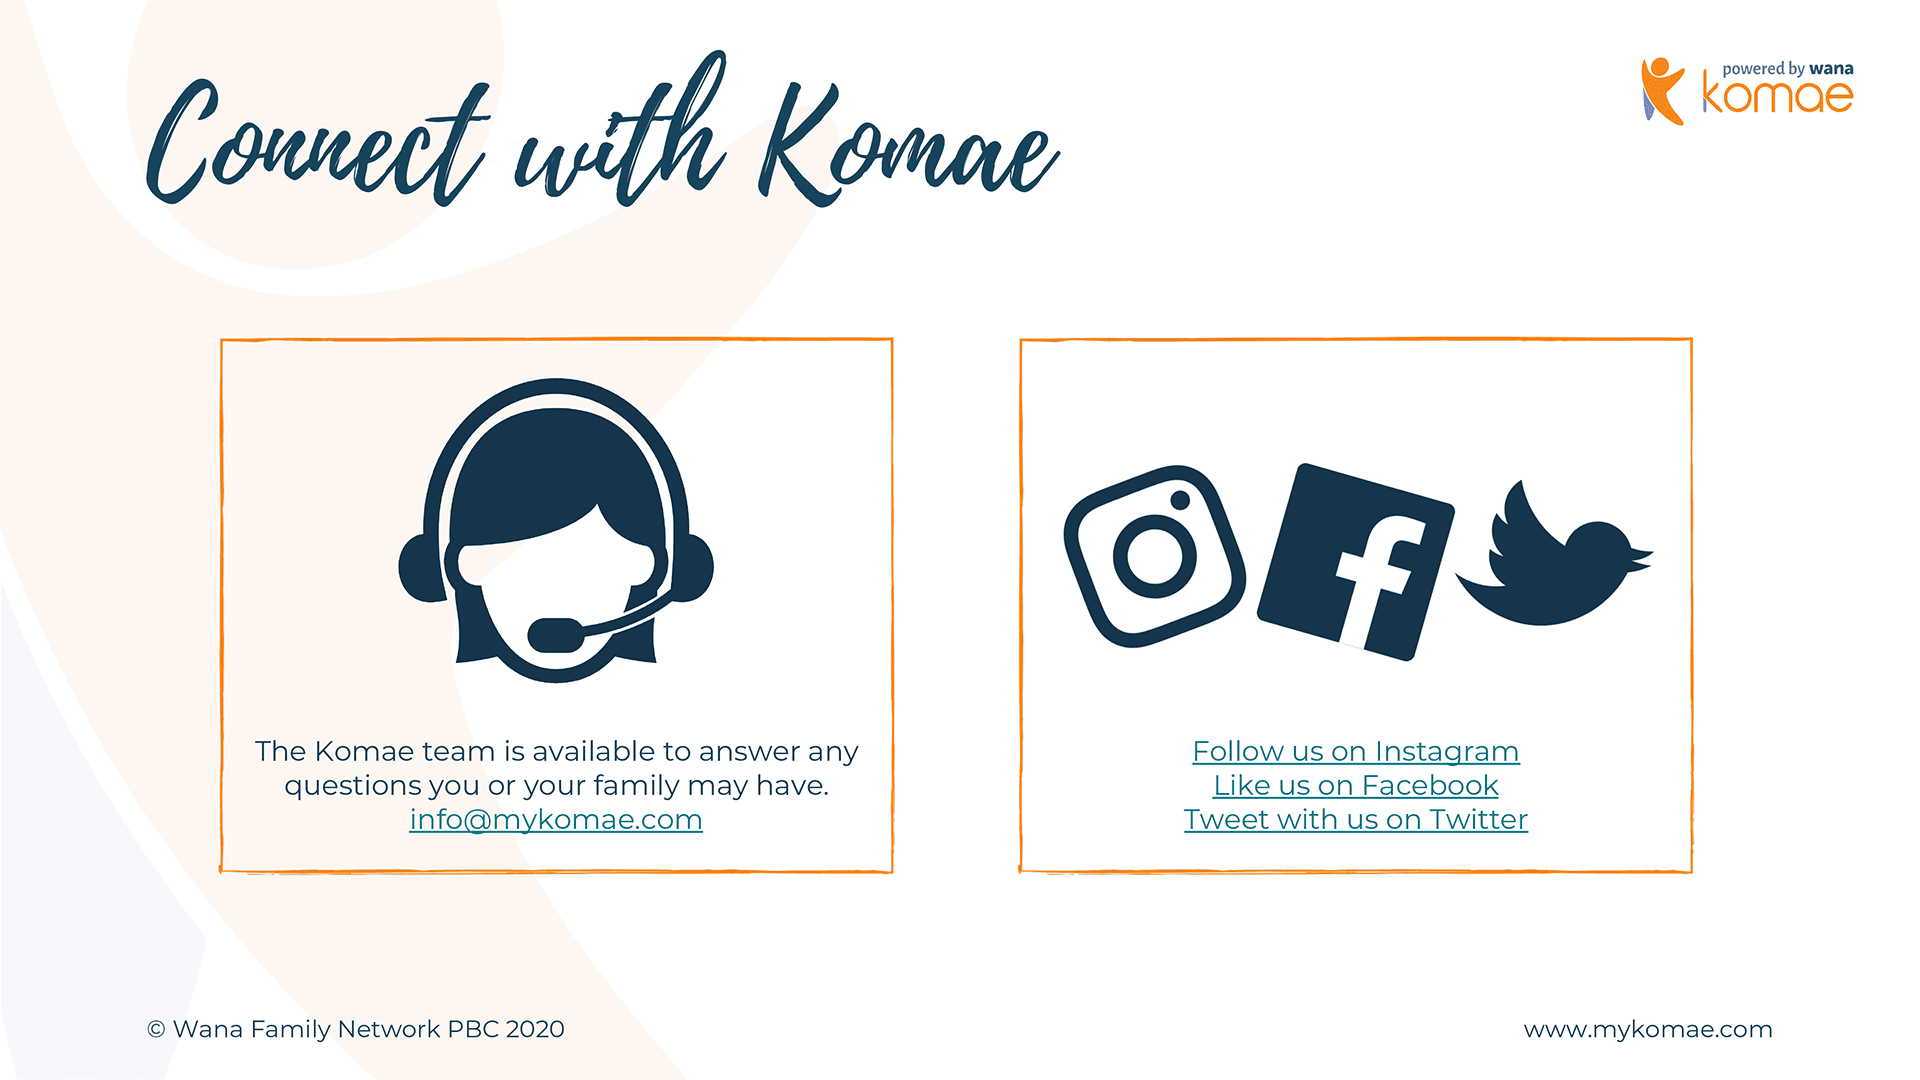 connect with Komae over the phone or on social media